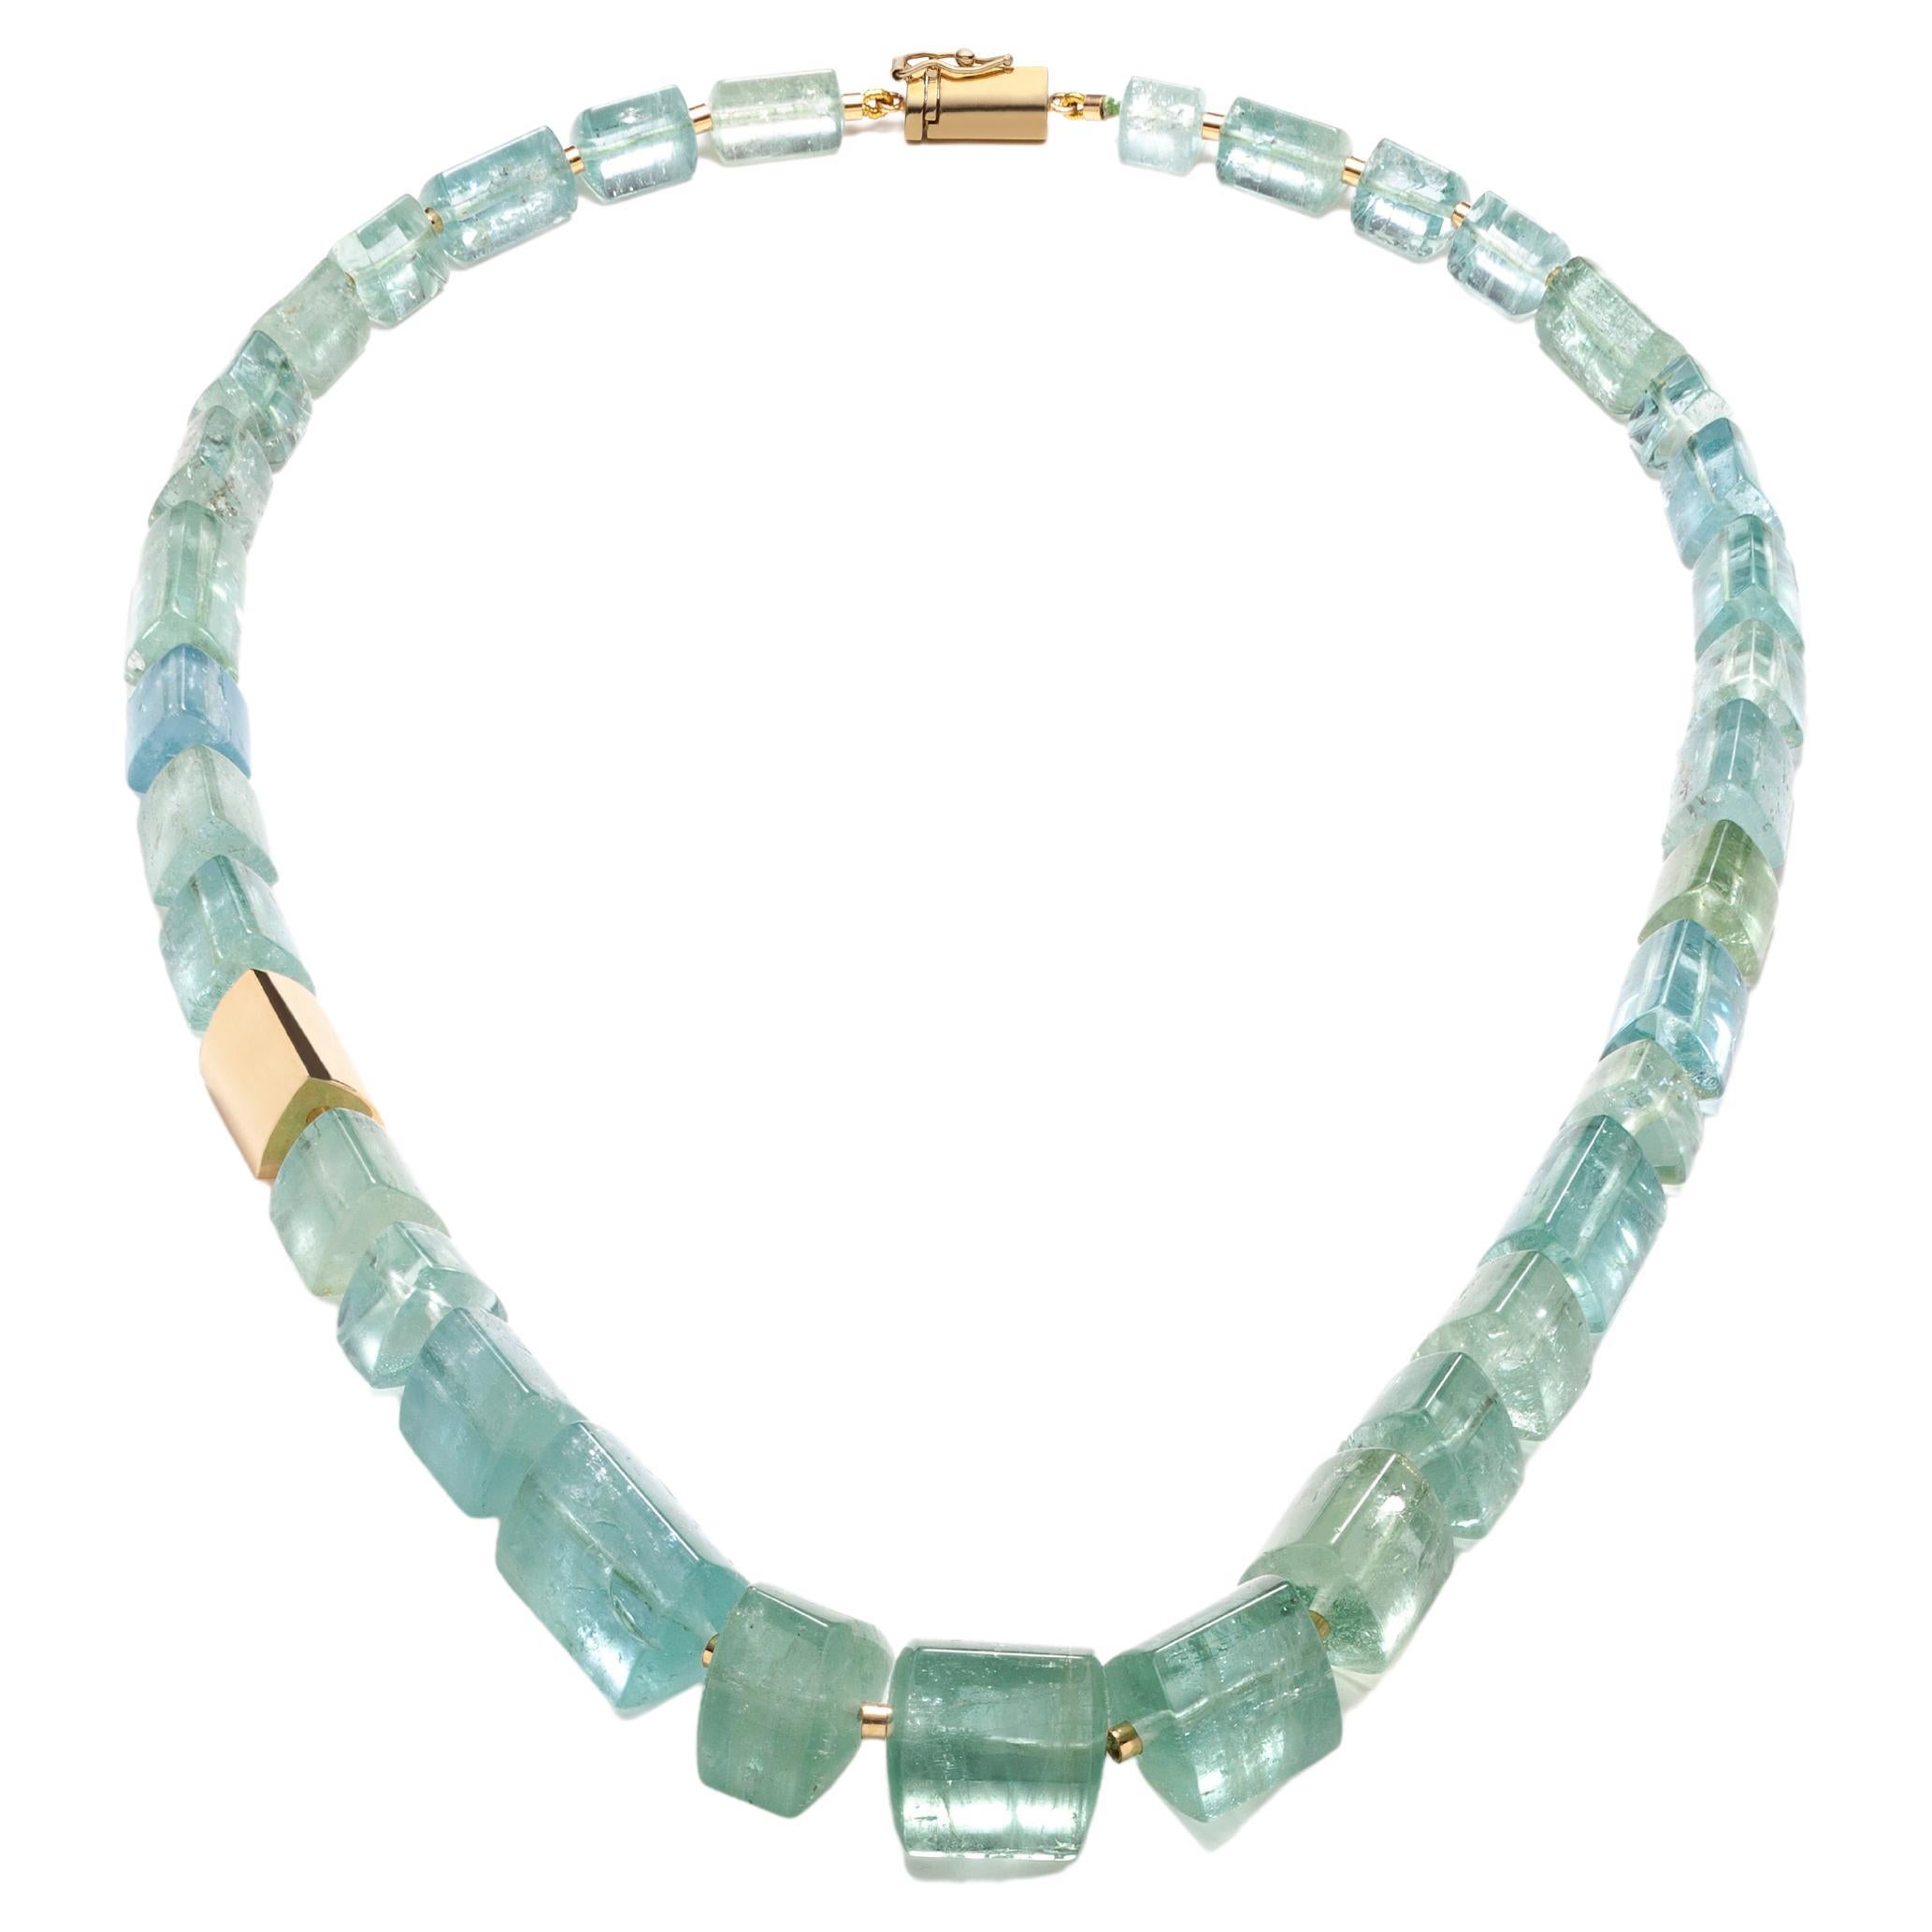 Aqua Marina, Natural Aquamarine Necklace Mounted in 18k Yellow Gold by Serafino For Sale